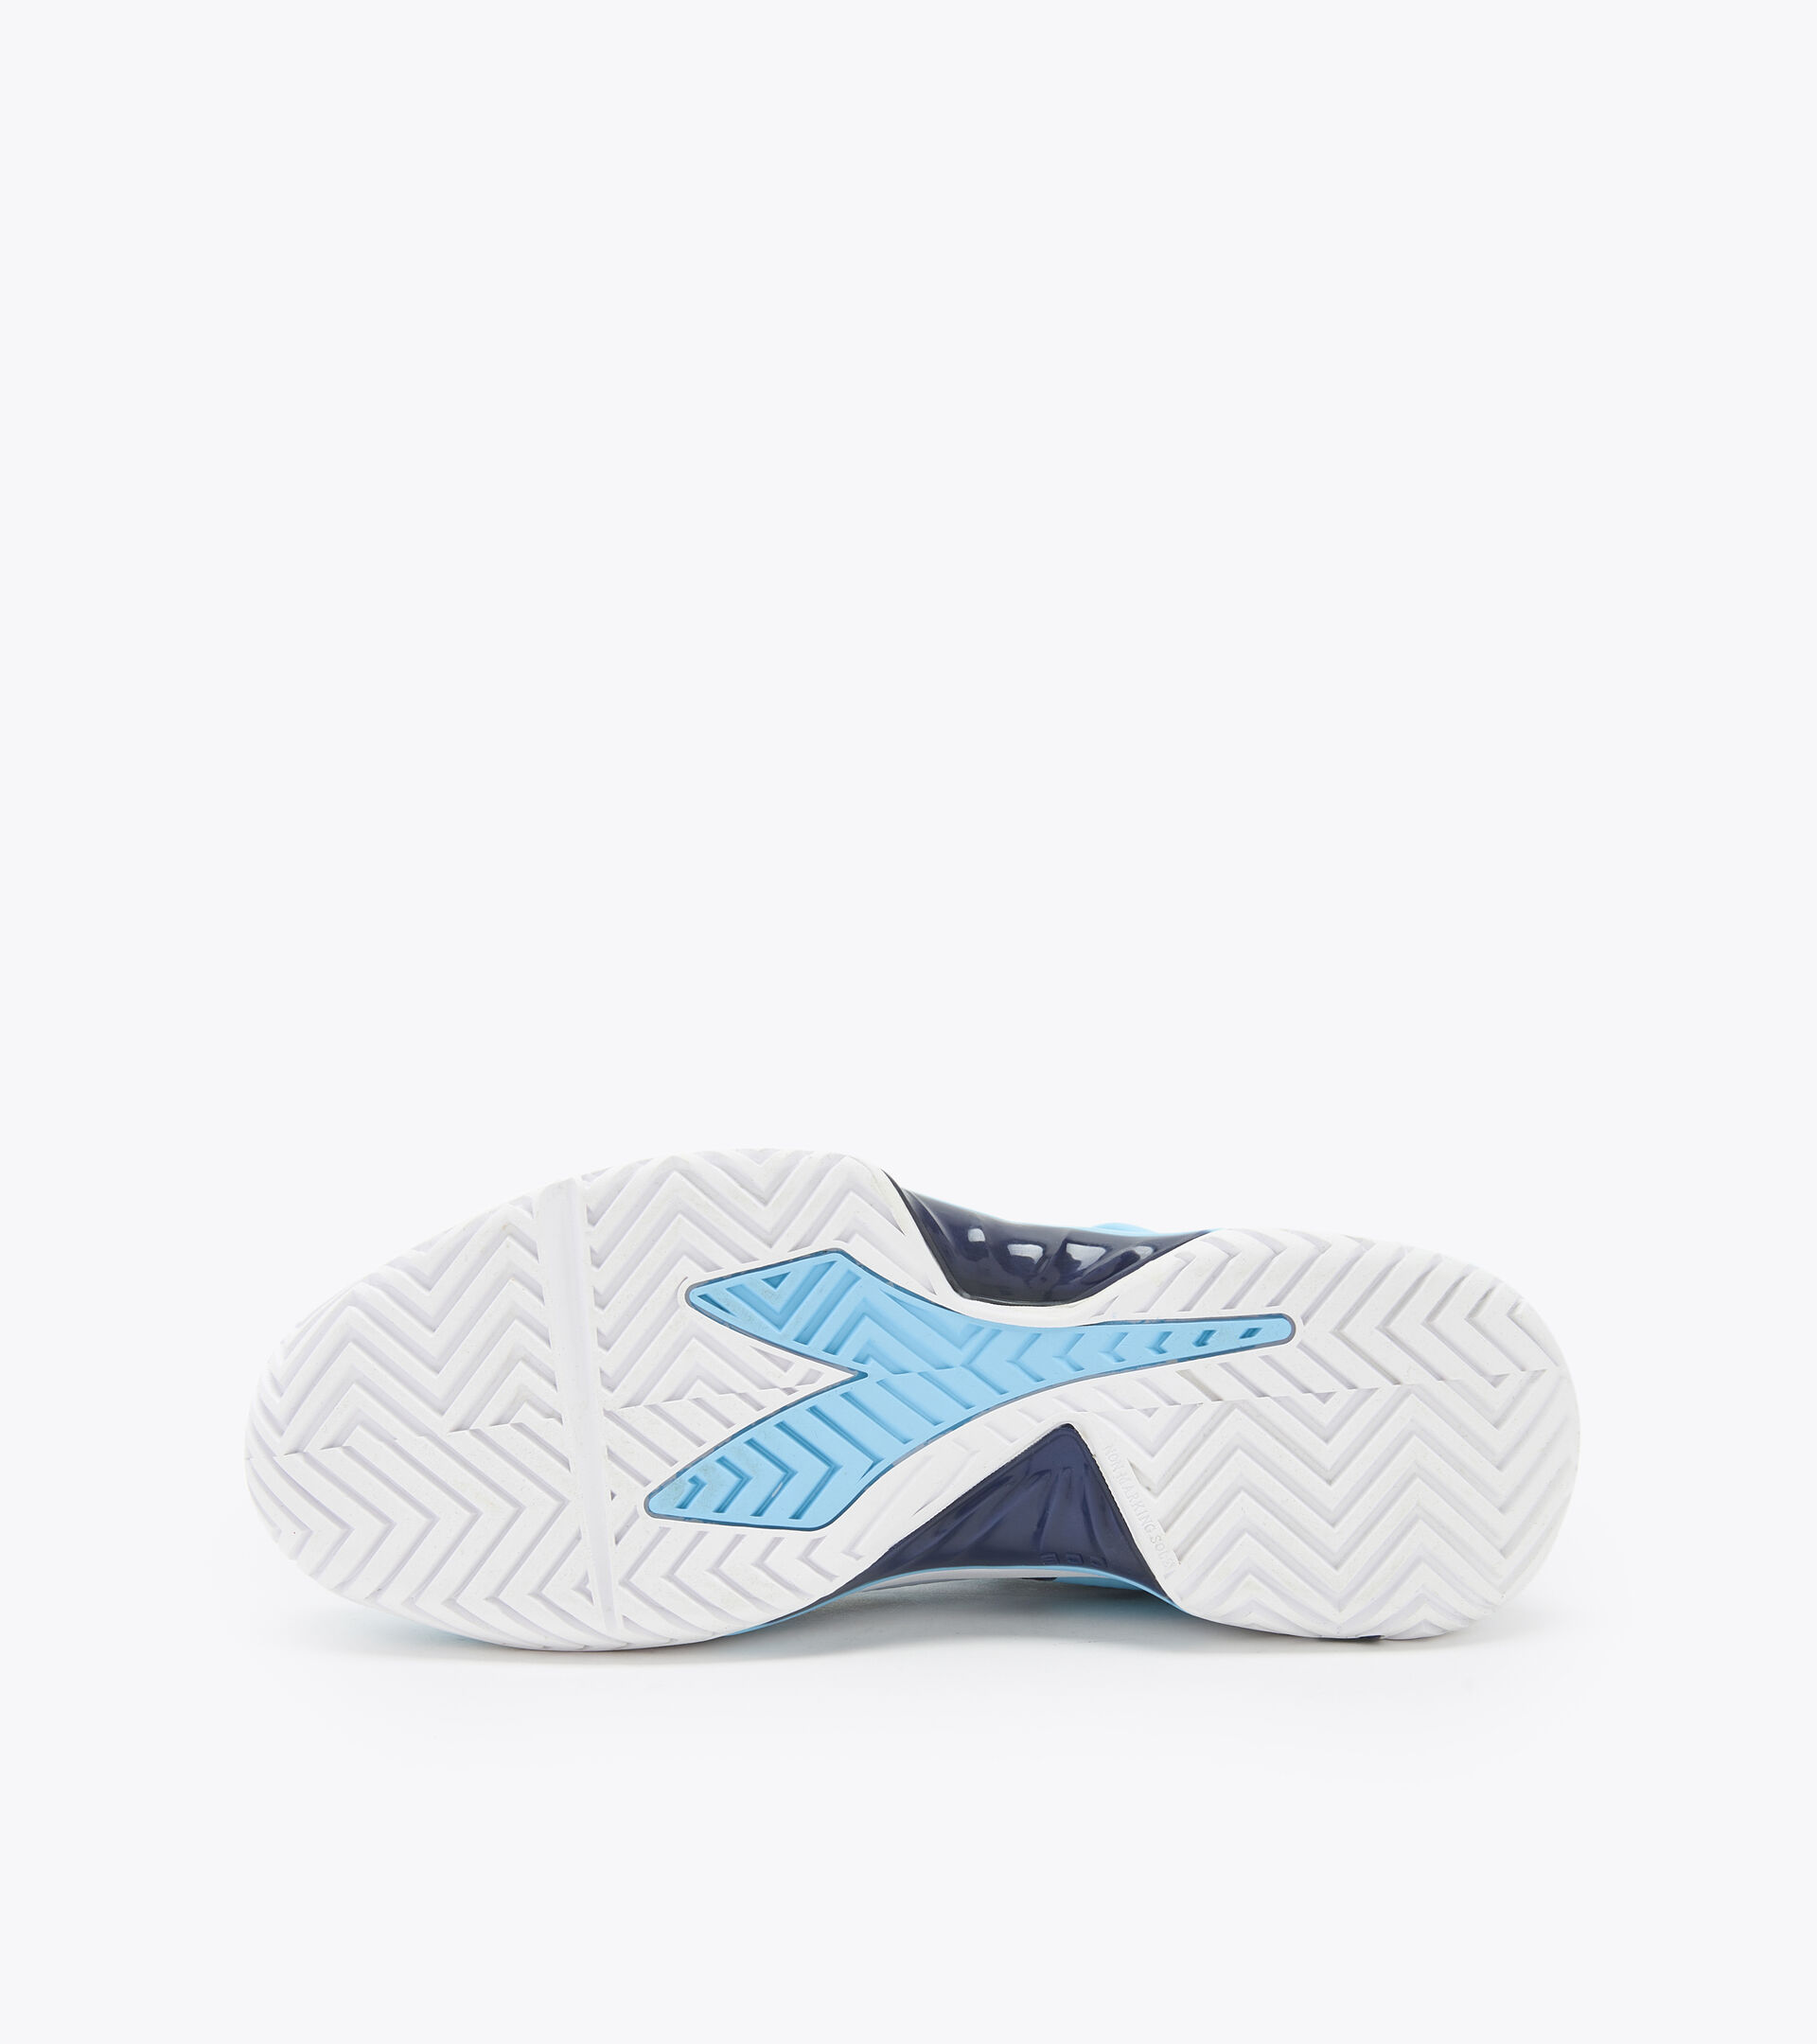 Tennis shoes for clay courts - Women B.ICON 2 W CLAY BRIGHT BABY BLUE/WHITE - Diadora